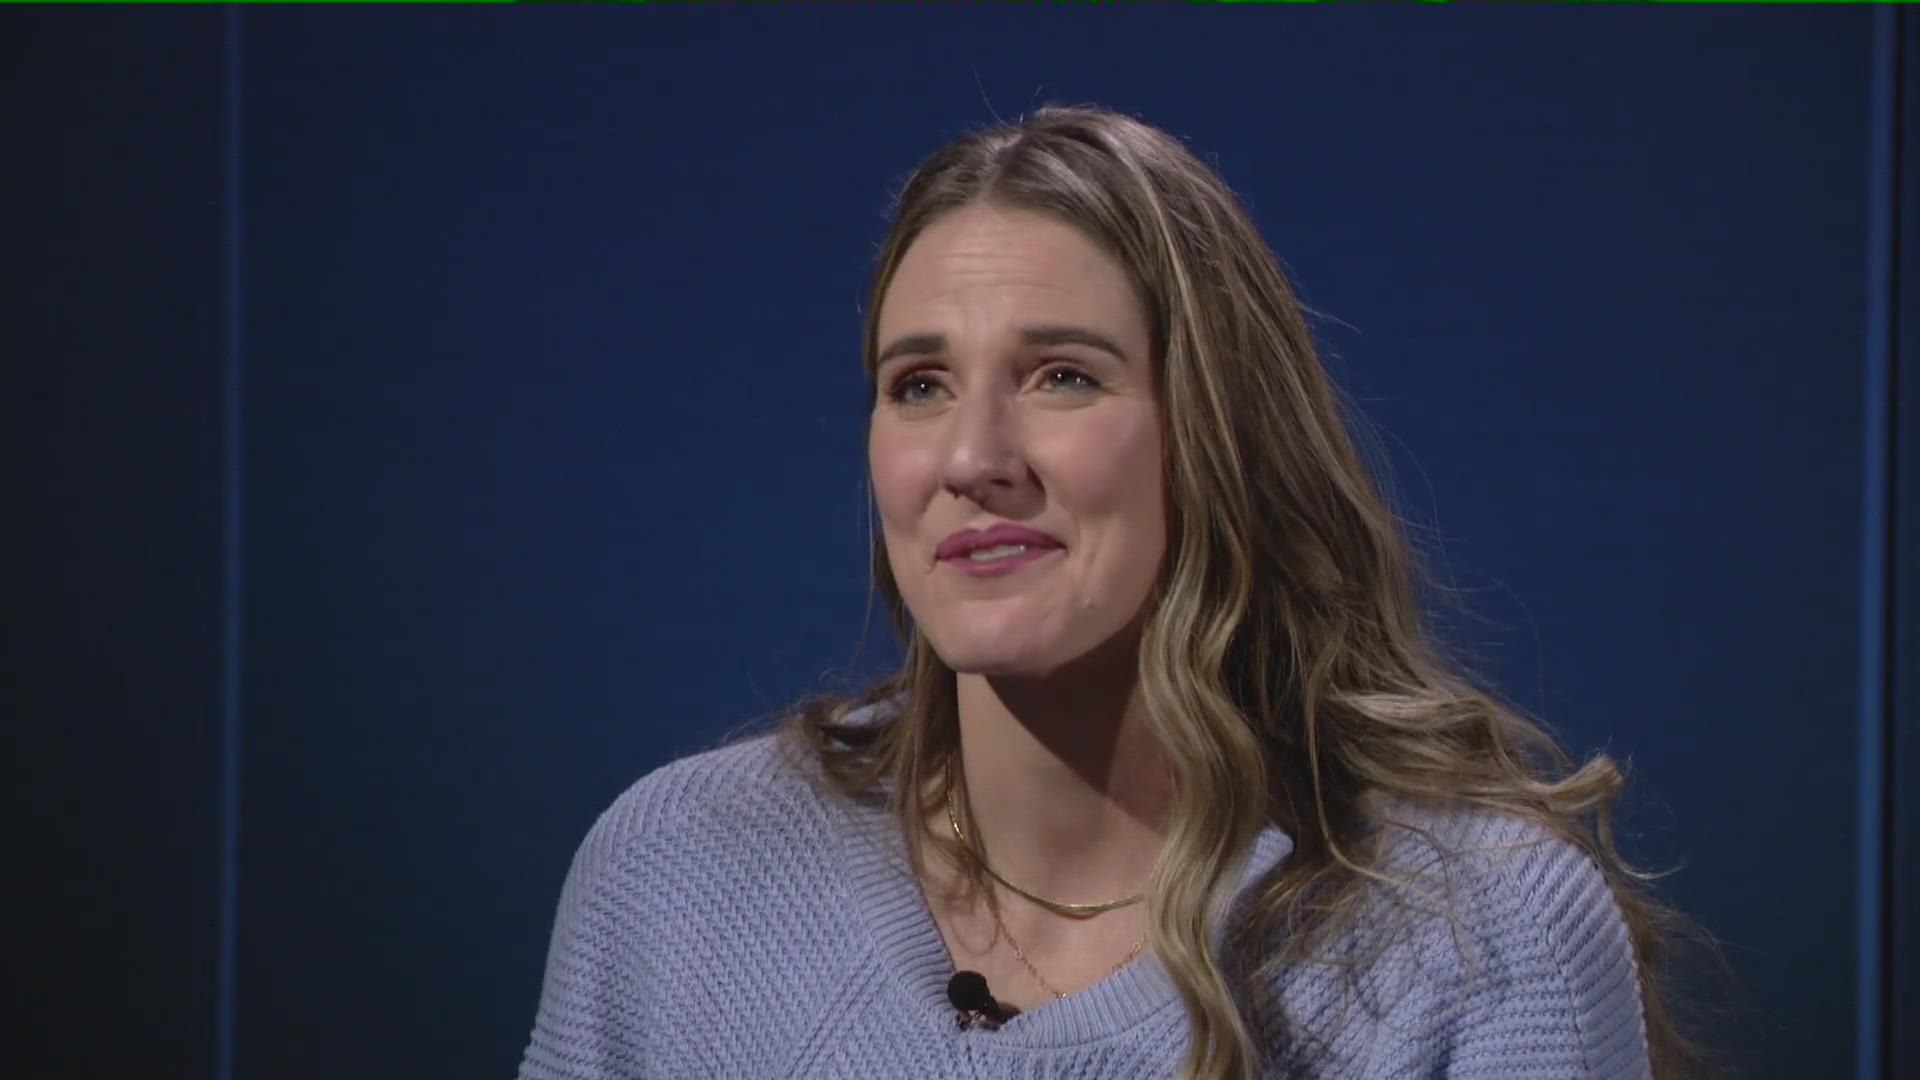 Missy Franklin talks about creating new family.